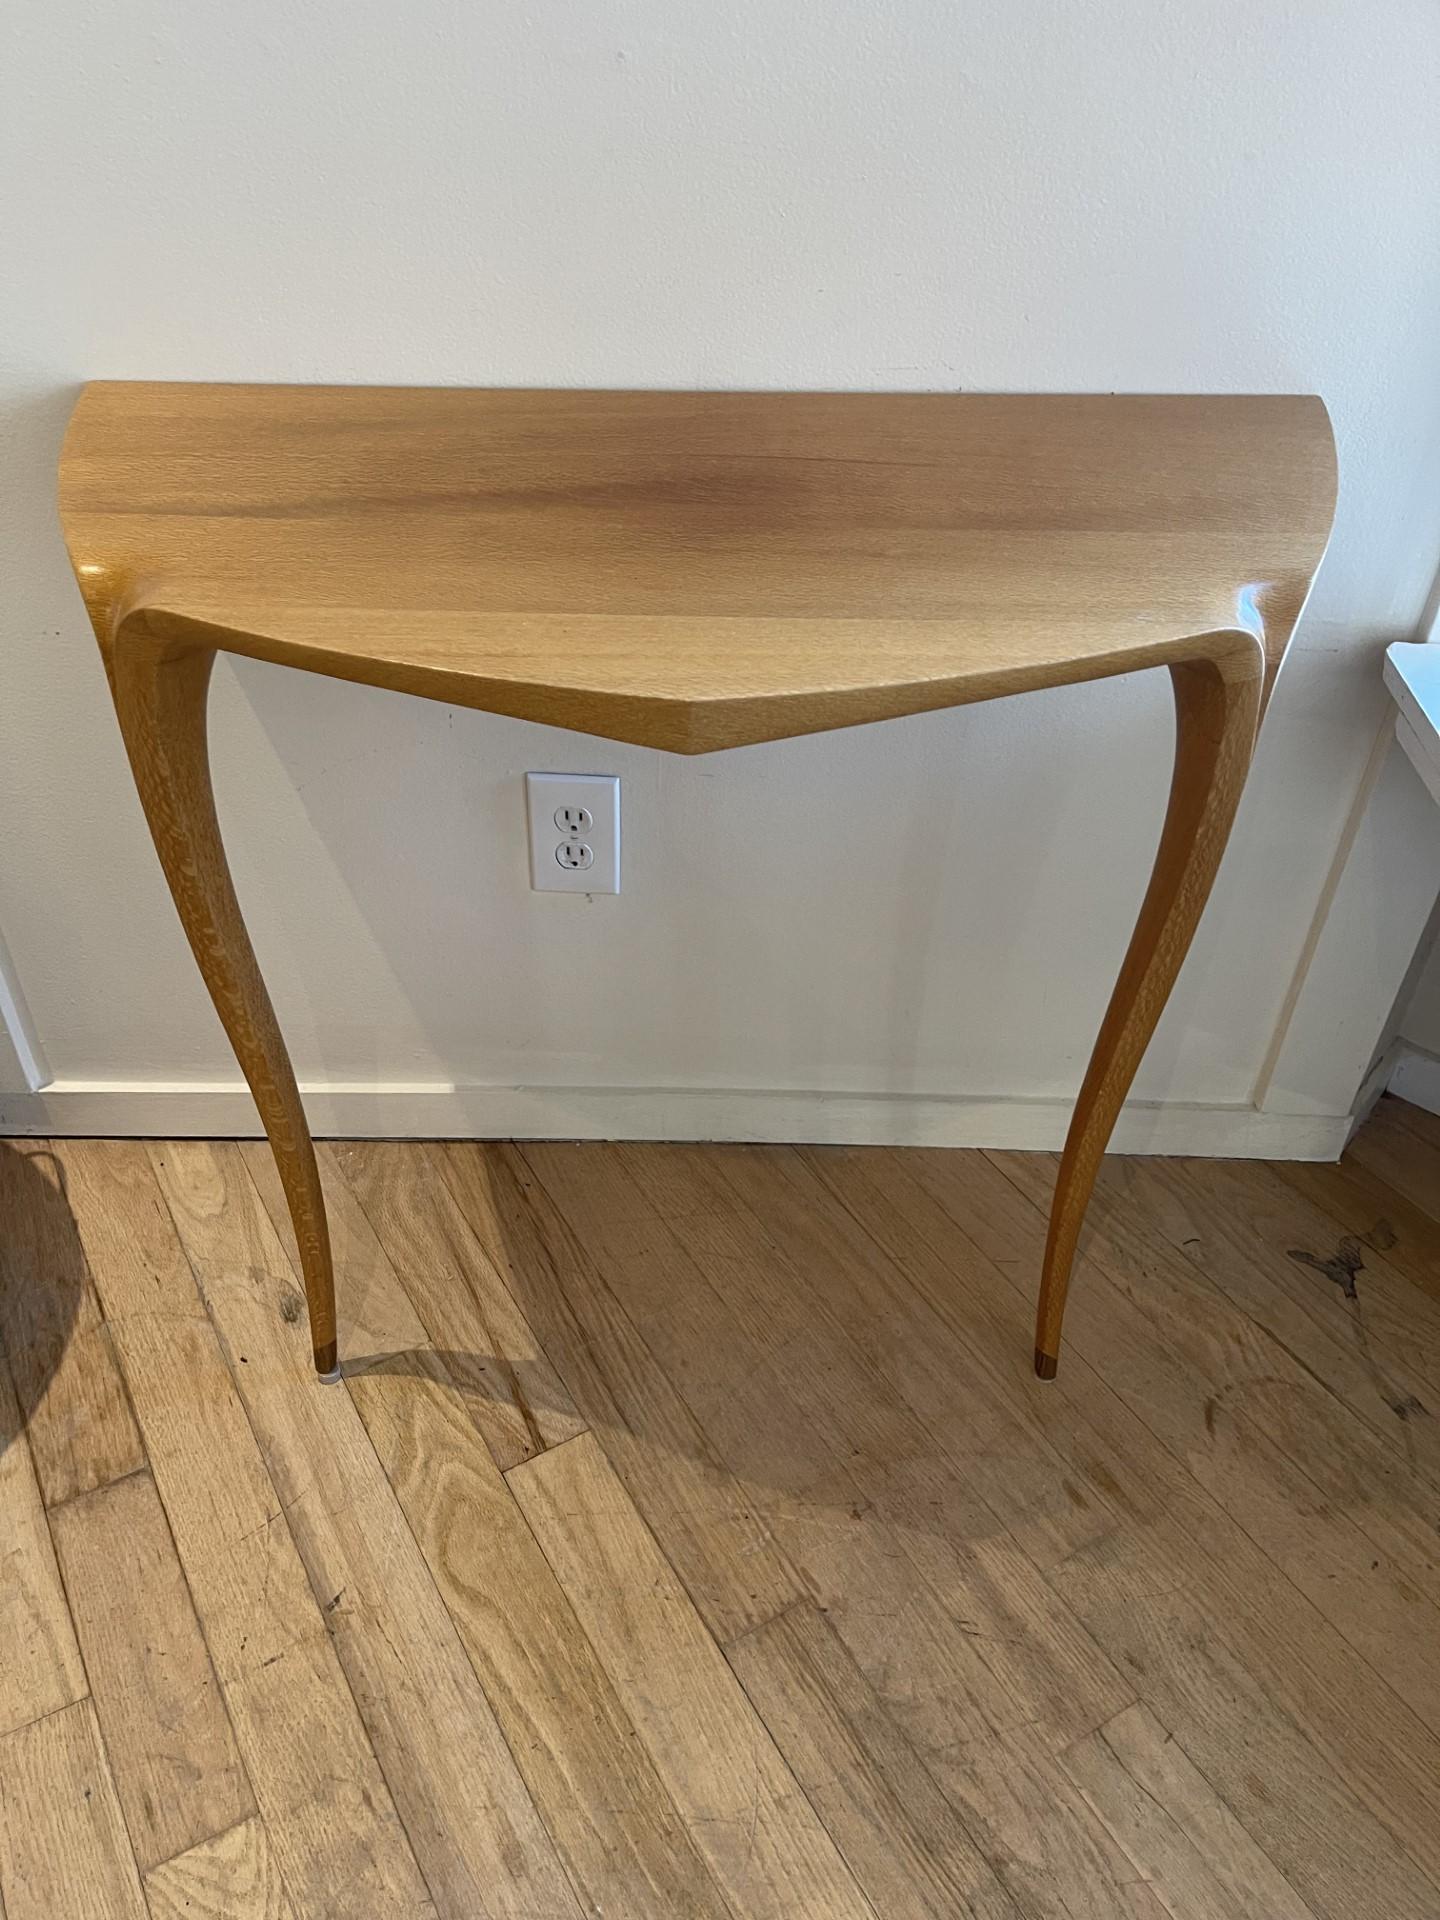 Hand-Crafted Wall Mounted Console Table by American Studio Craftsman  David Ebner.  1998 For Sale